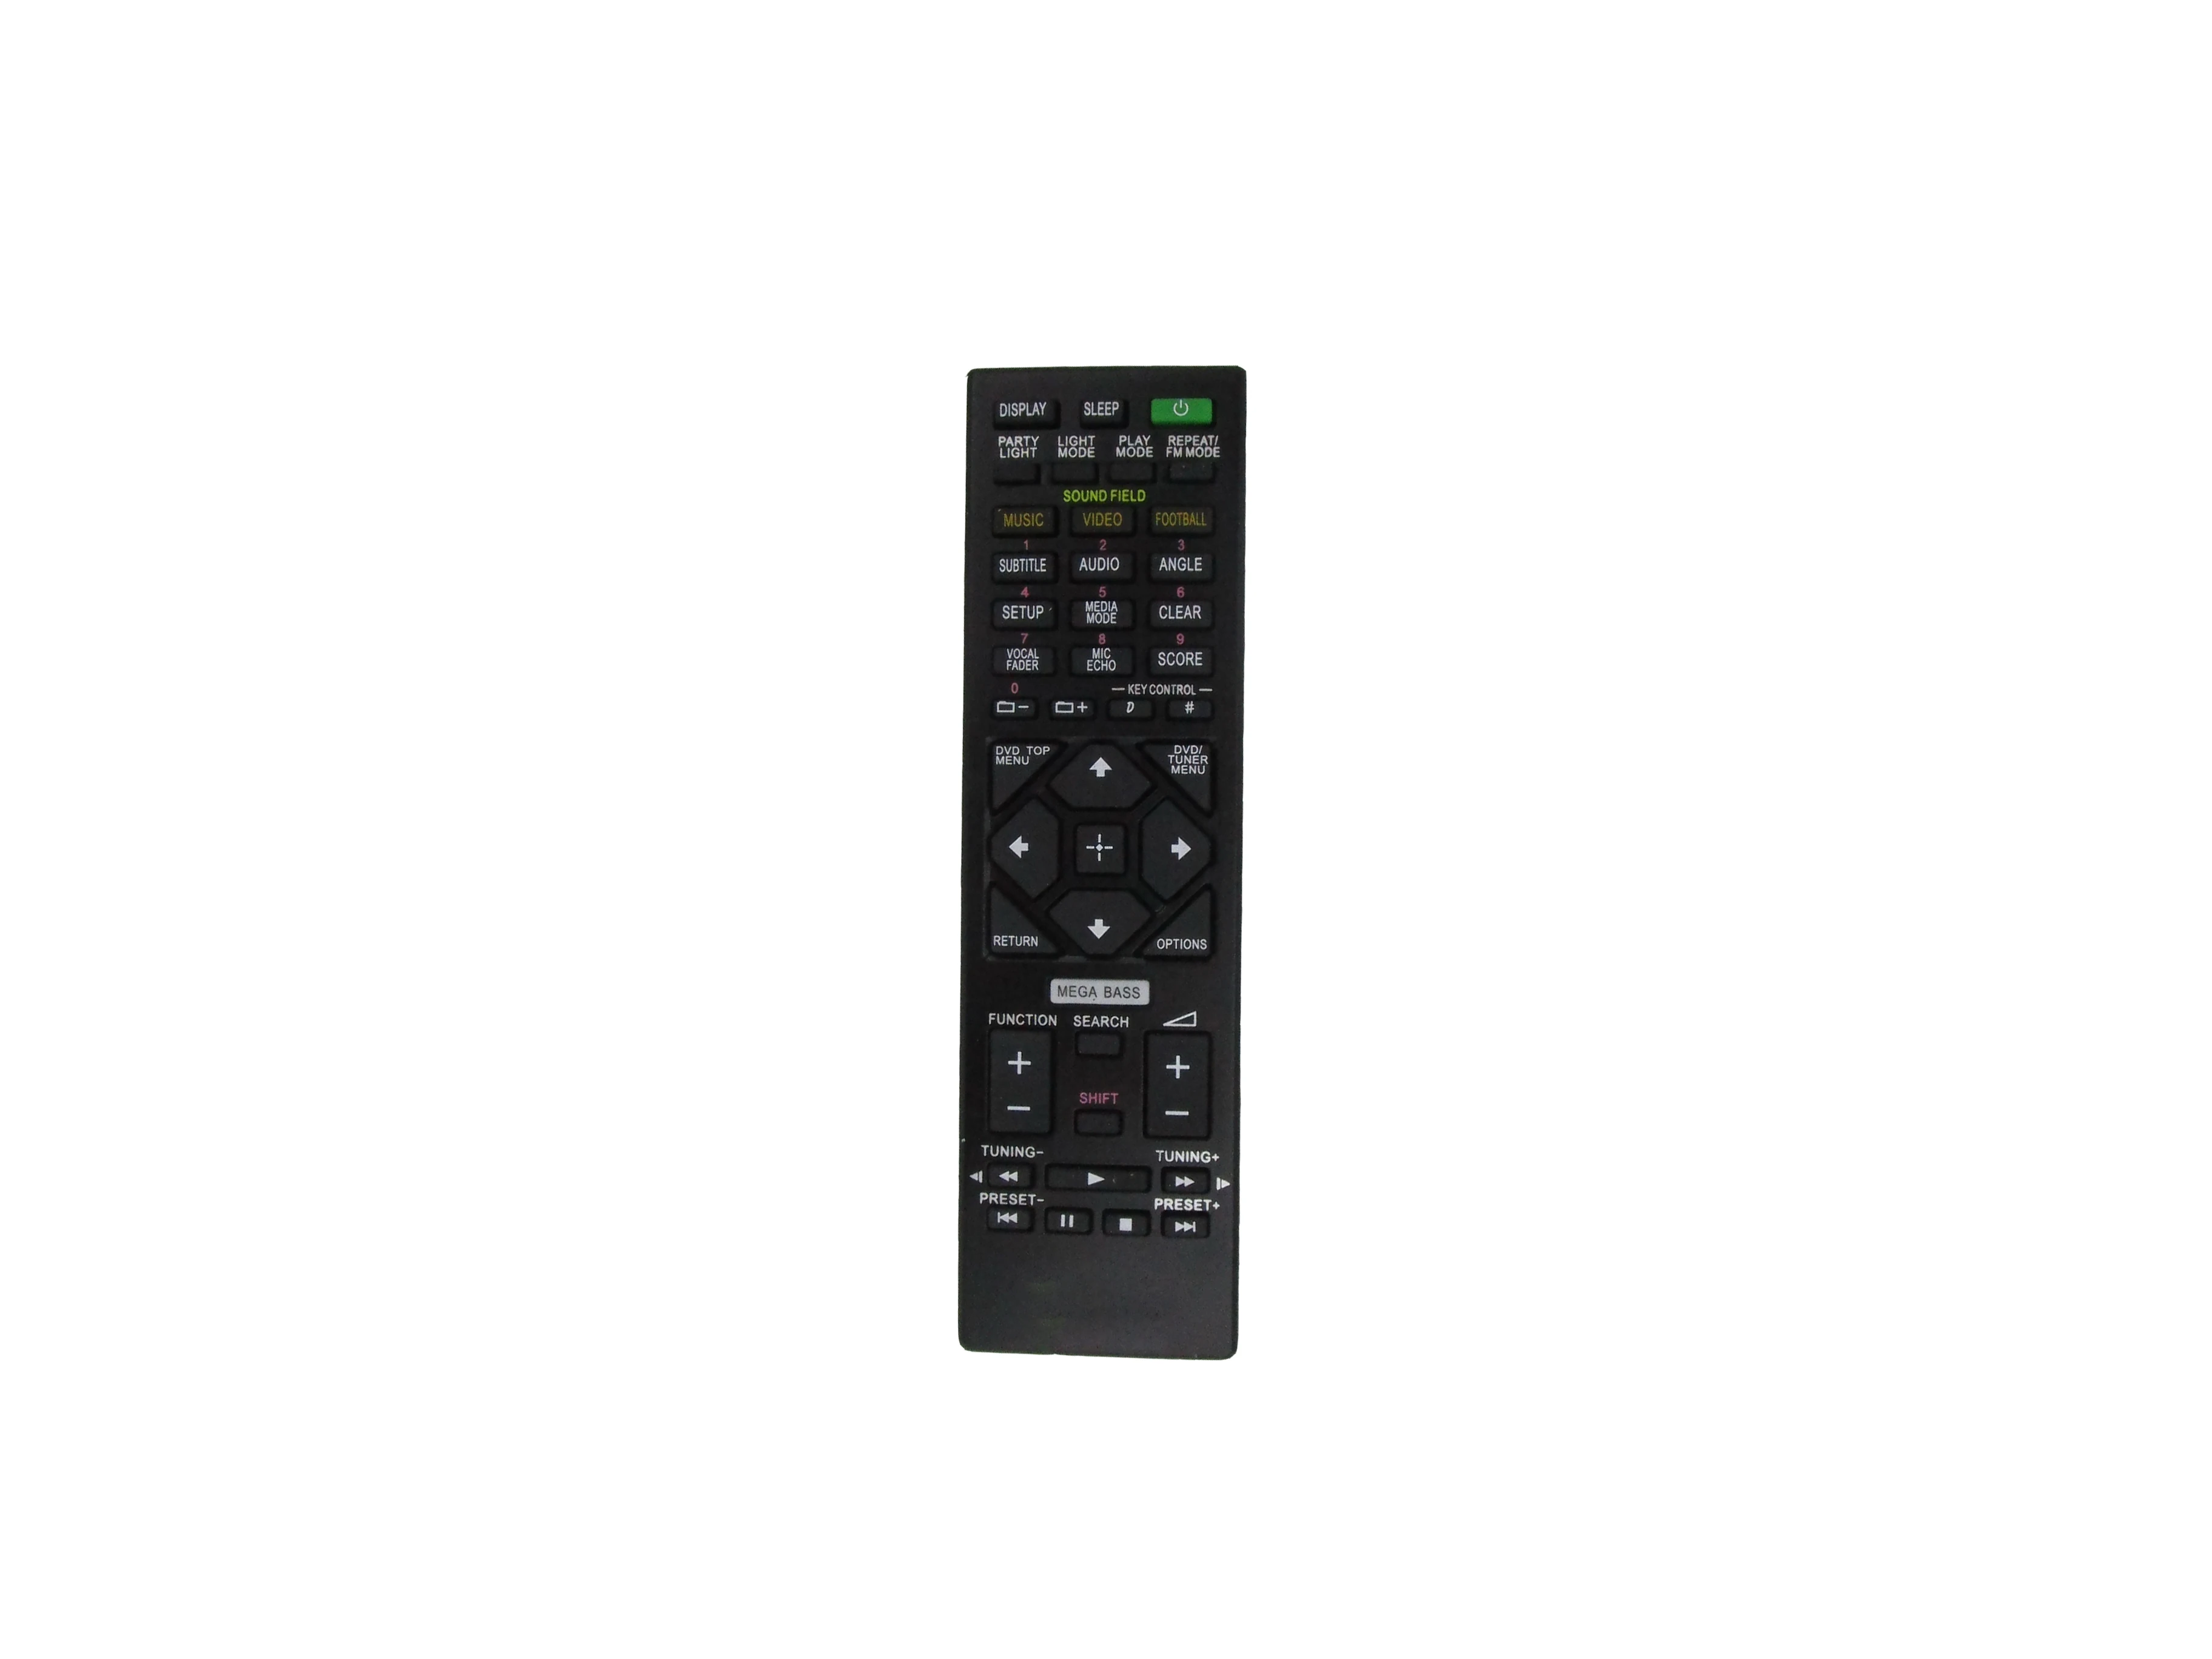 Remote Control For Sony Rmt-am210u Mhc-v44d Rmt-am420u Mhc-v50d Mhc-gt4d  Sa-wgt4d Ss-gt4db Shake-x10d Home Audio Stereo System - Remote Control -  AliExpress